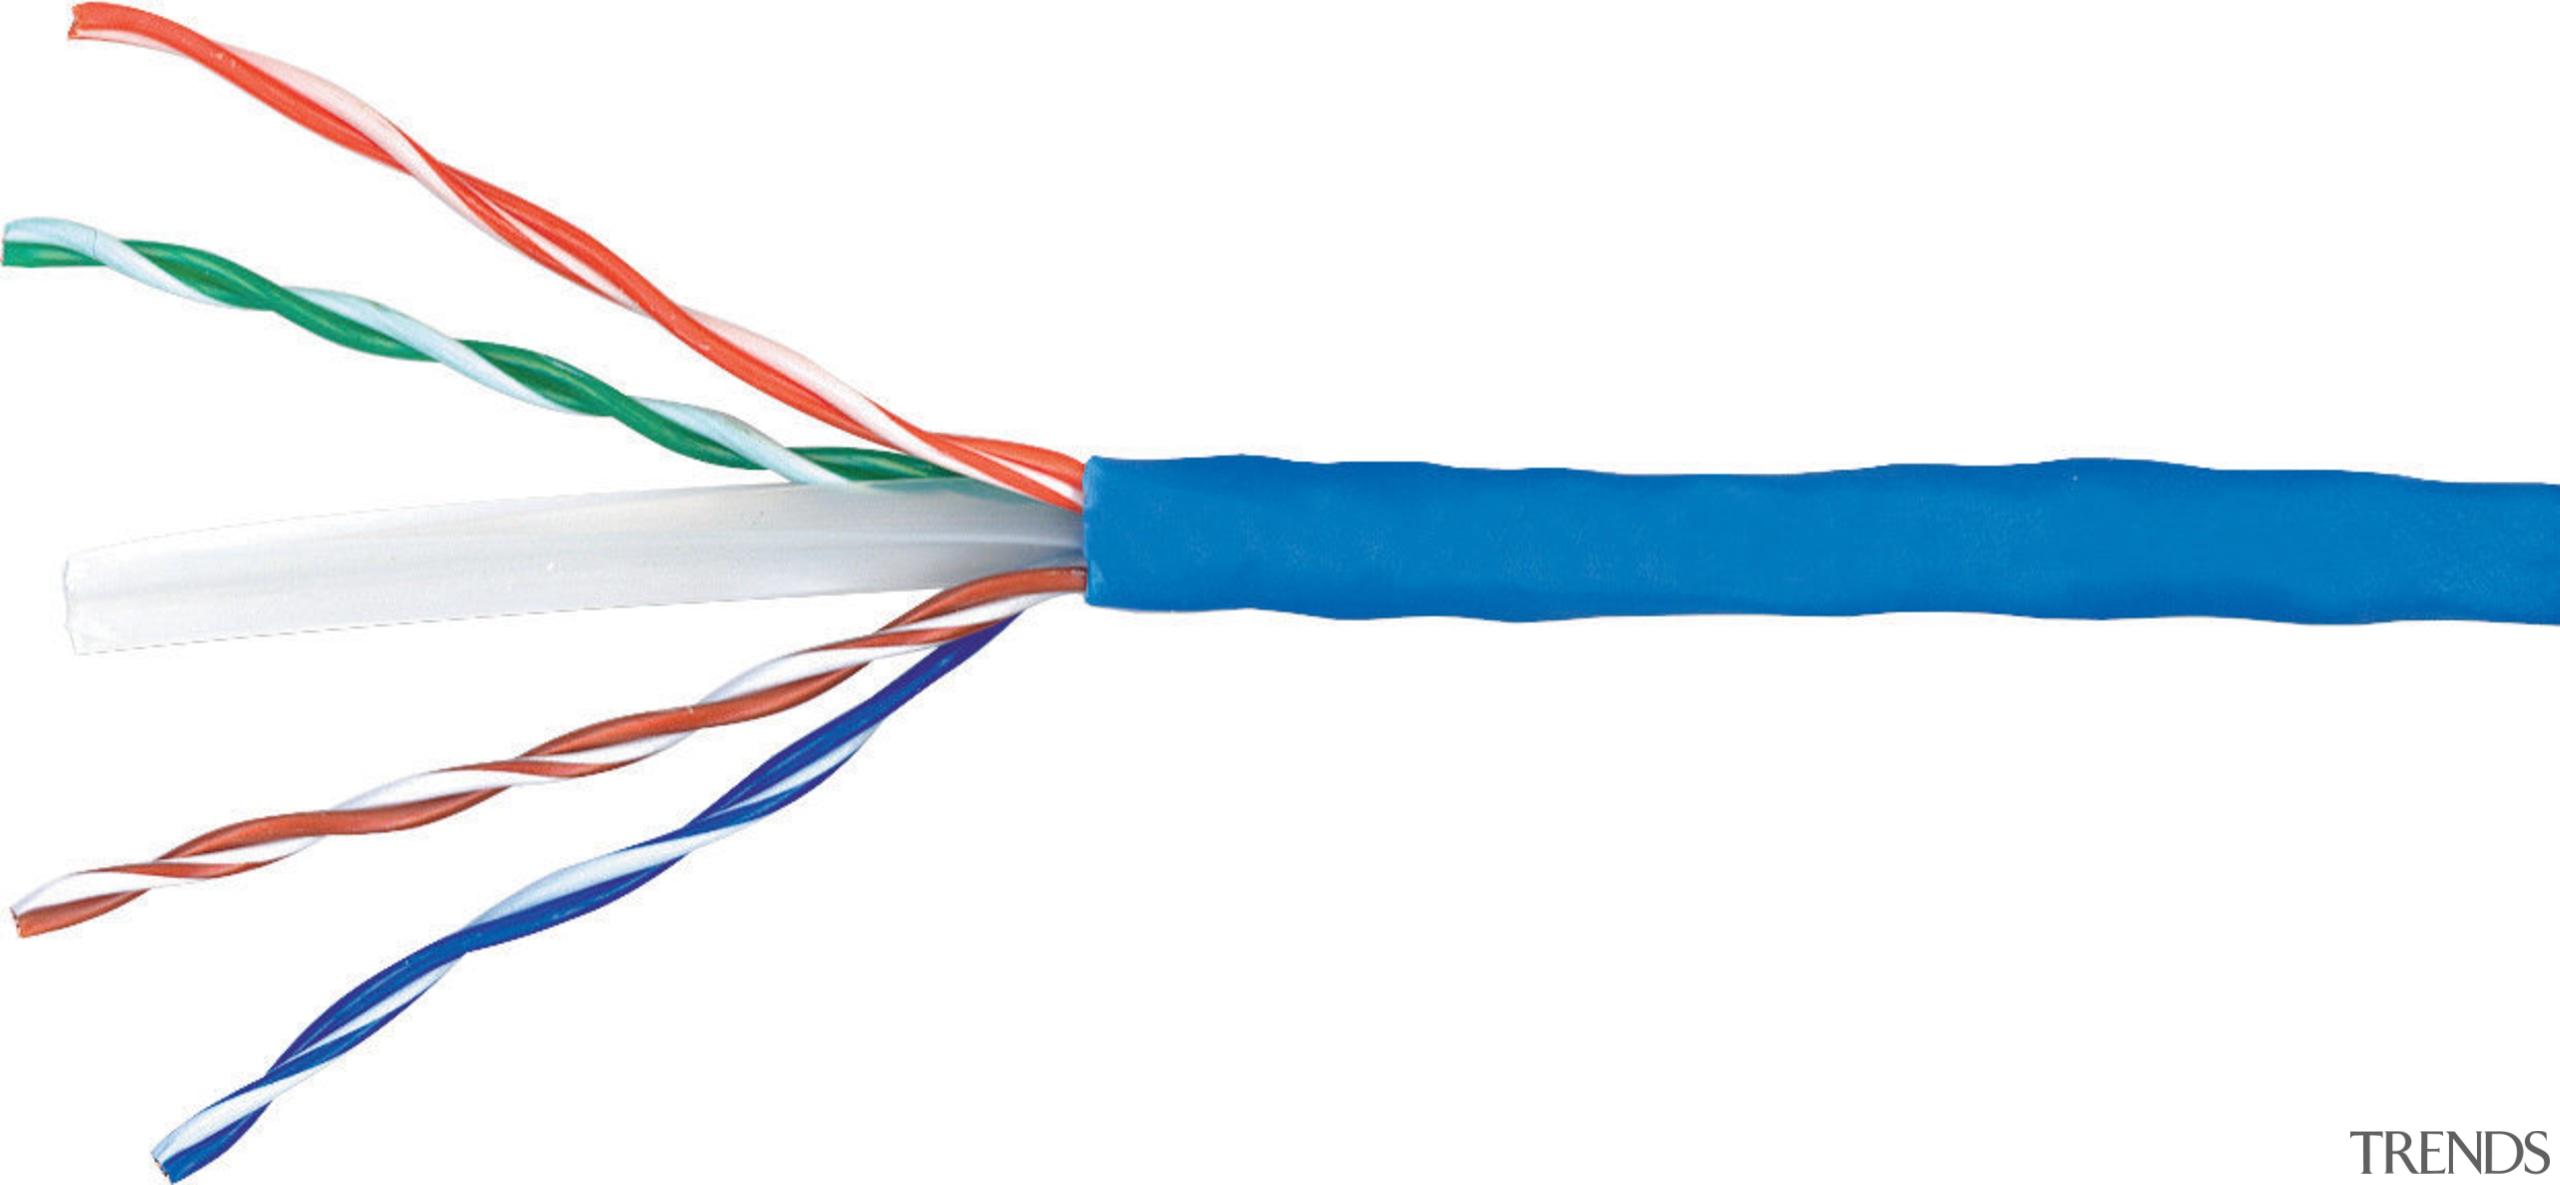 Image of titanium cabling by Clipsal. - Image cable, electronics accessory, line, networking cables, white